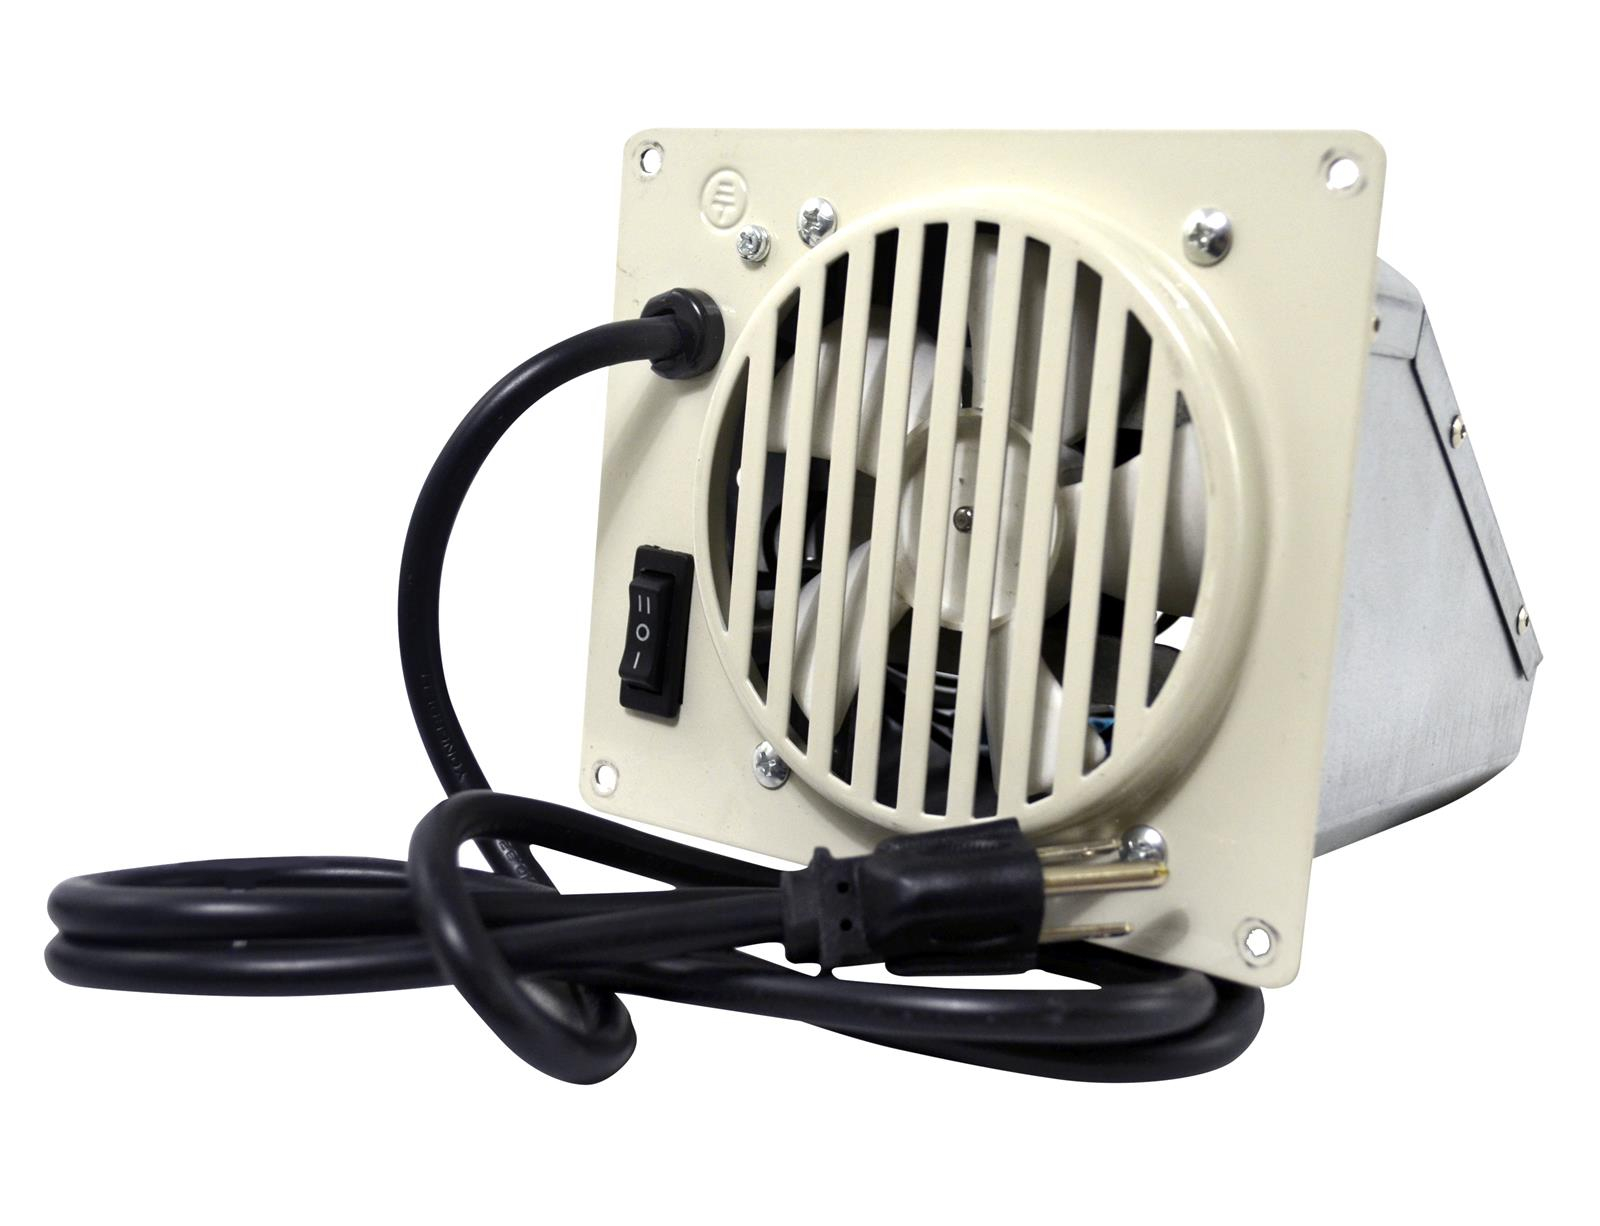 Mr Heater Vent Free Blower Fans F299201 with proportions 1600 X 1226